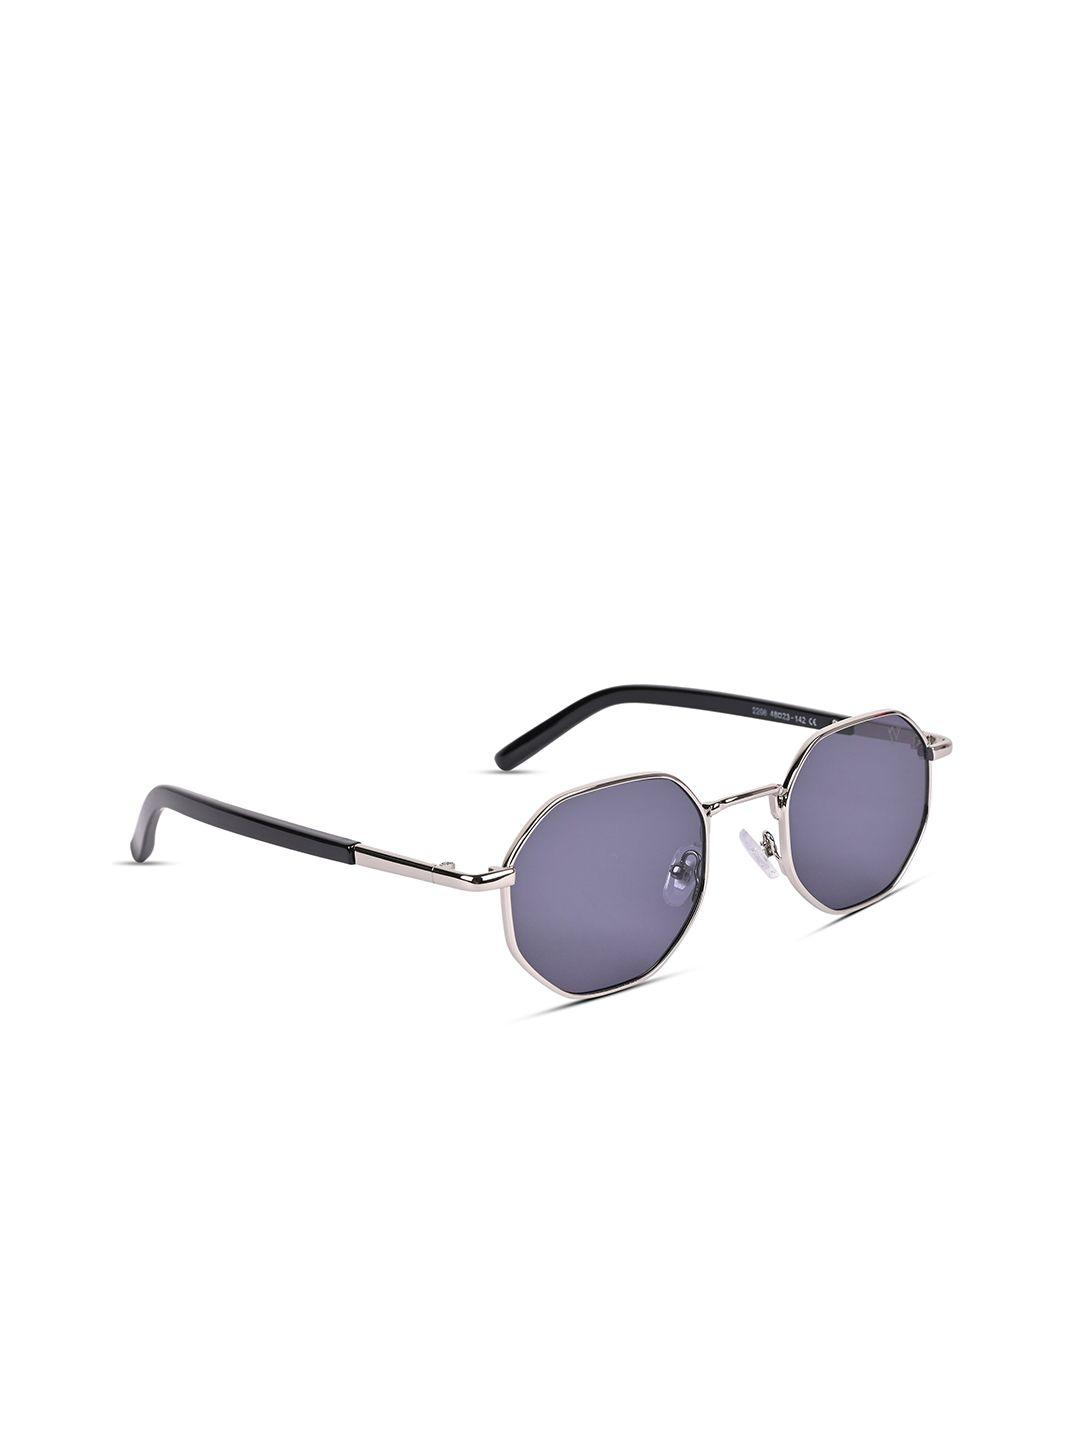 voyage unisex black lens & silver-toned round sunglasses with uv protected lens